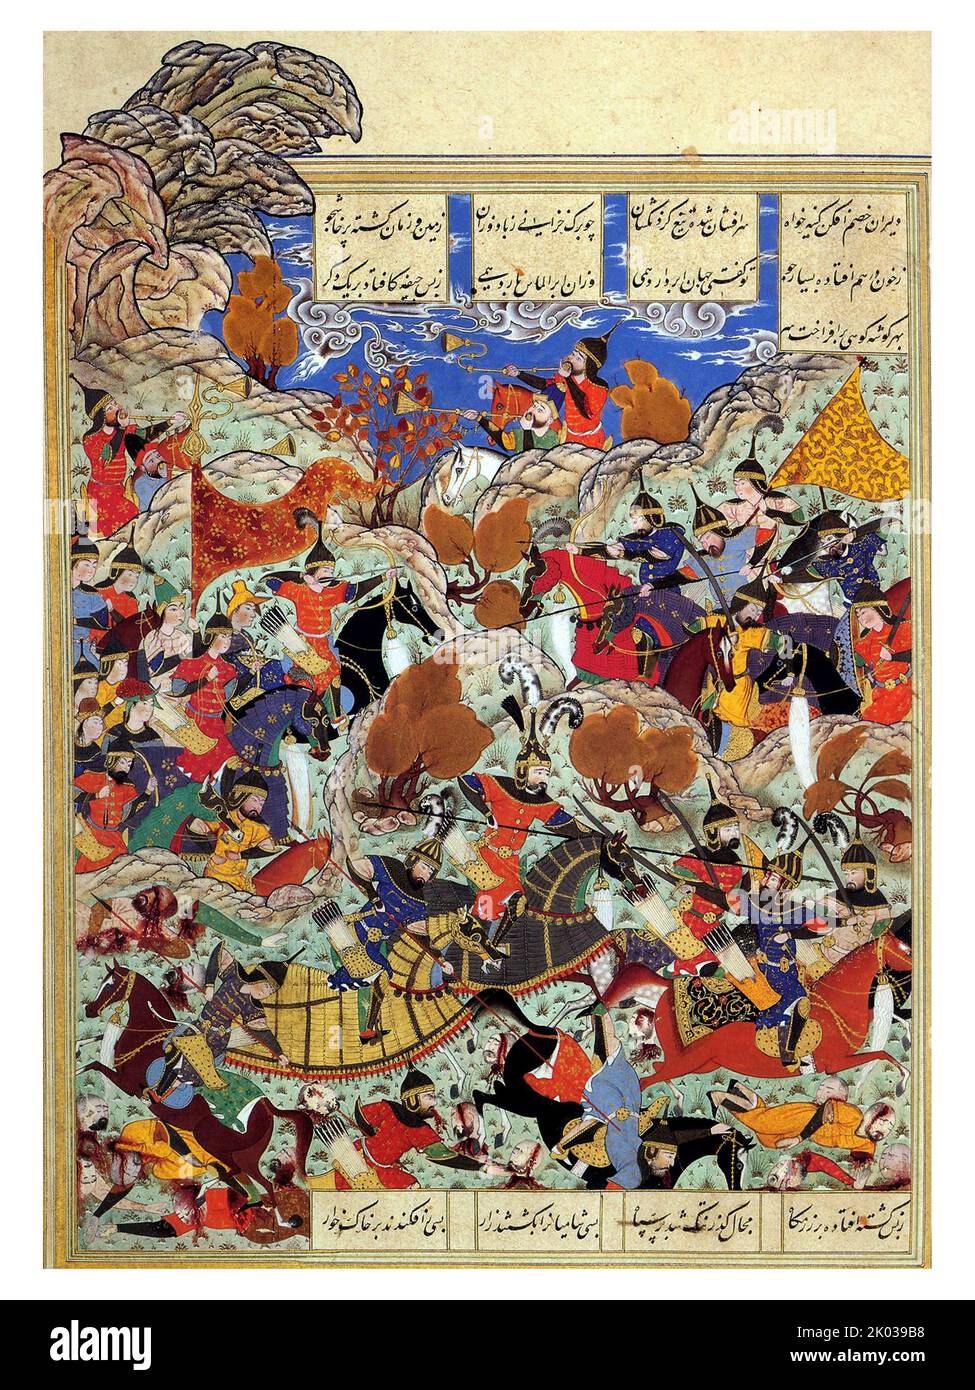 Battleground of Timur and Egyptian King. Timur (1336 - 1405), later Timur Gurkan a Turco-Mongol conqueror who founded the Timurid Empire in and around modern-day Afghanistan, Iran and Central Asia, becoming the first ruler of the Timurid dynasty. As an undefeated commander, he is widely regarded as one of the greatest military leaders and tacticians in history. Stock Photo